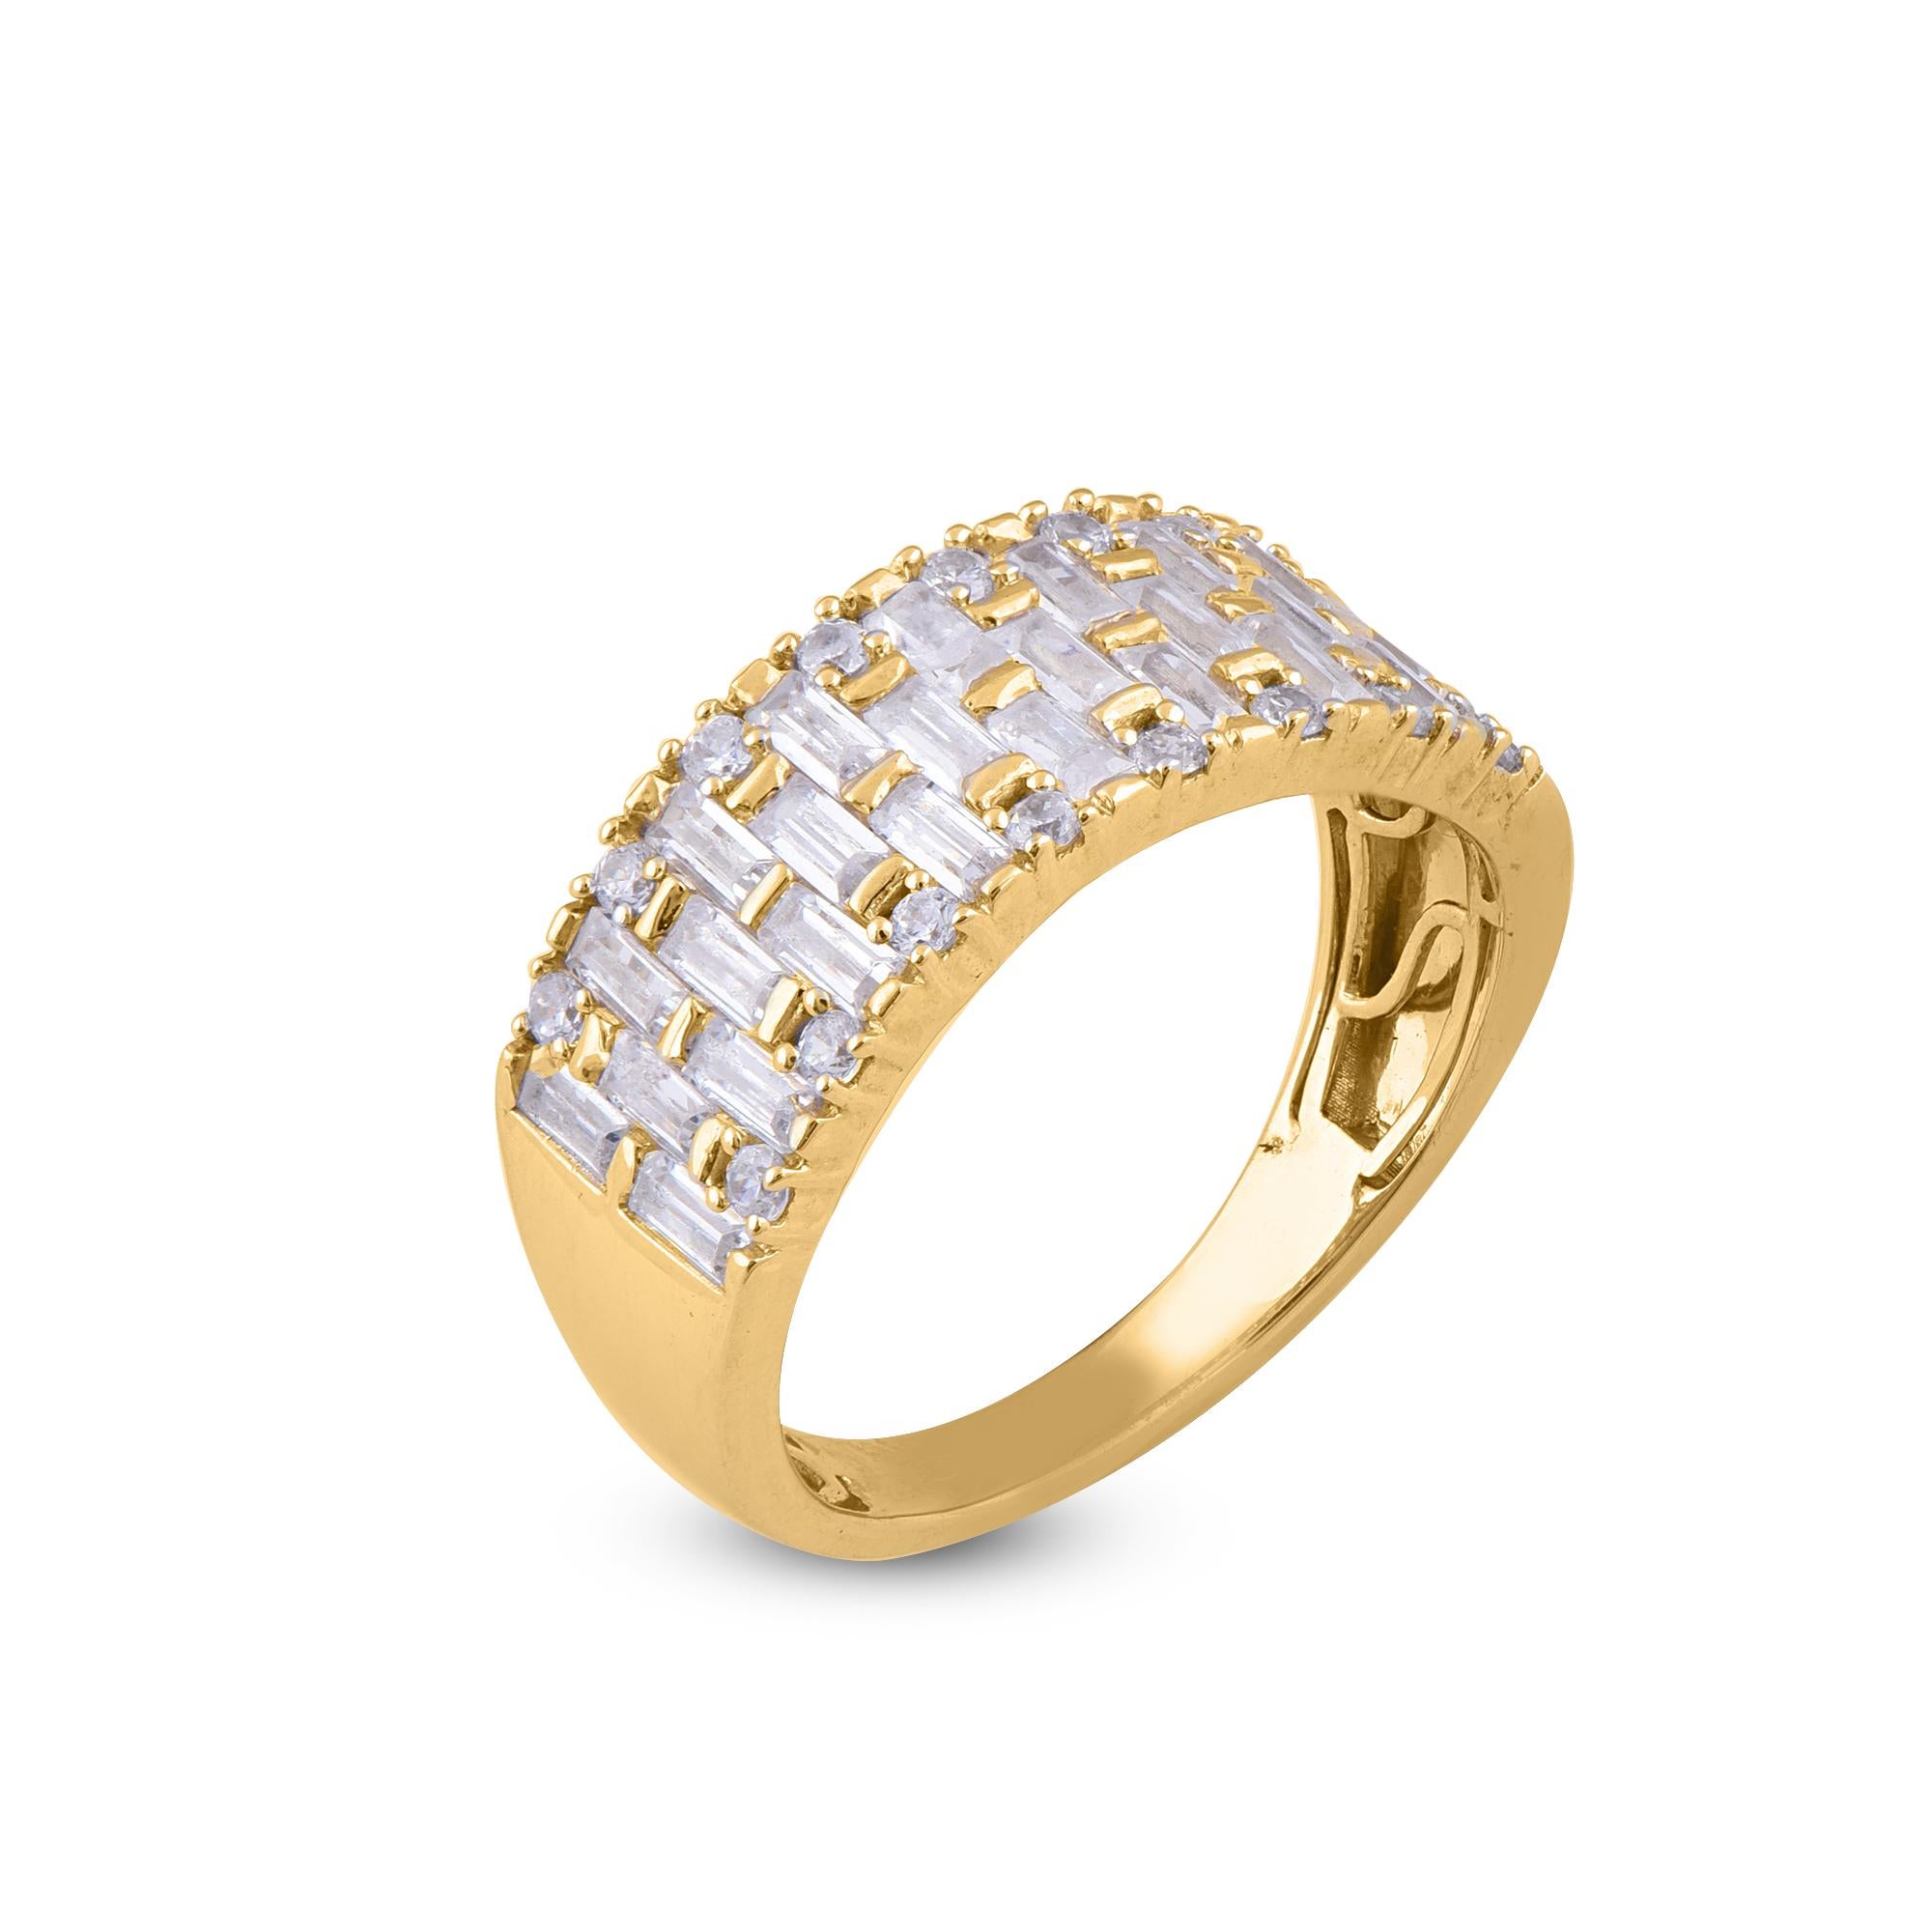 Bring charm to your look with this diamond ring. The ring is crafted from 14-karat gold in your choice of white, rose, or yellow, and features Round Brilliant 16 and Baguette - 26 white diamonds, Prong & Channelset, H-I color I2 clarity and a high